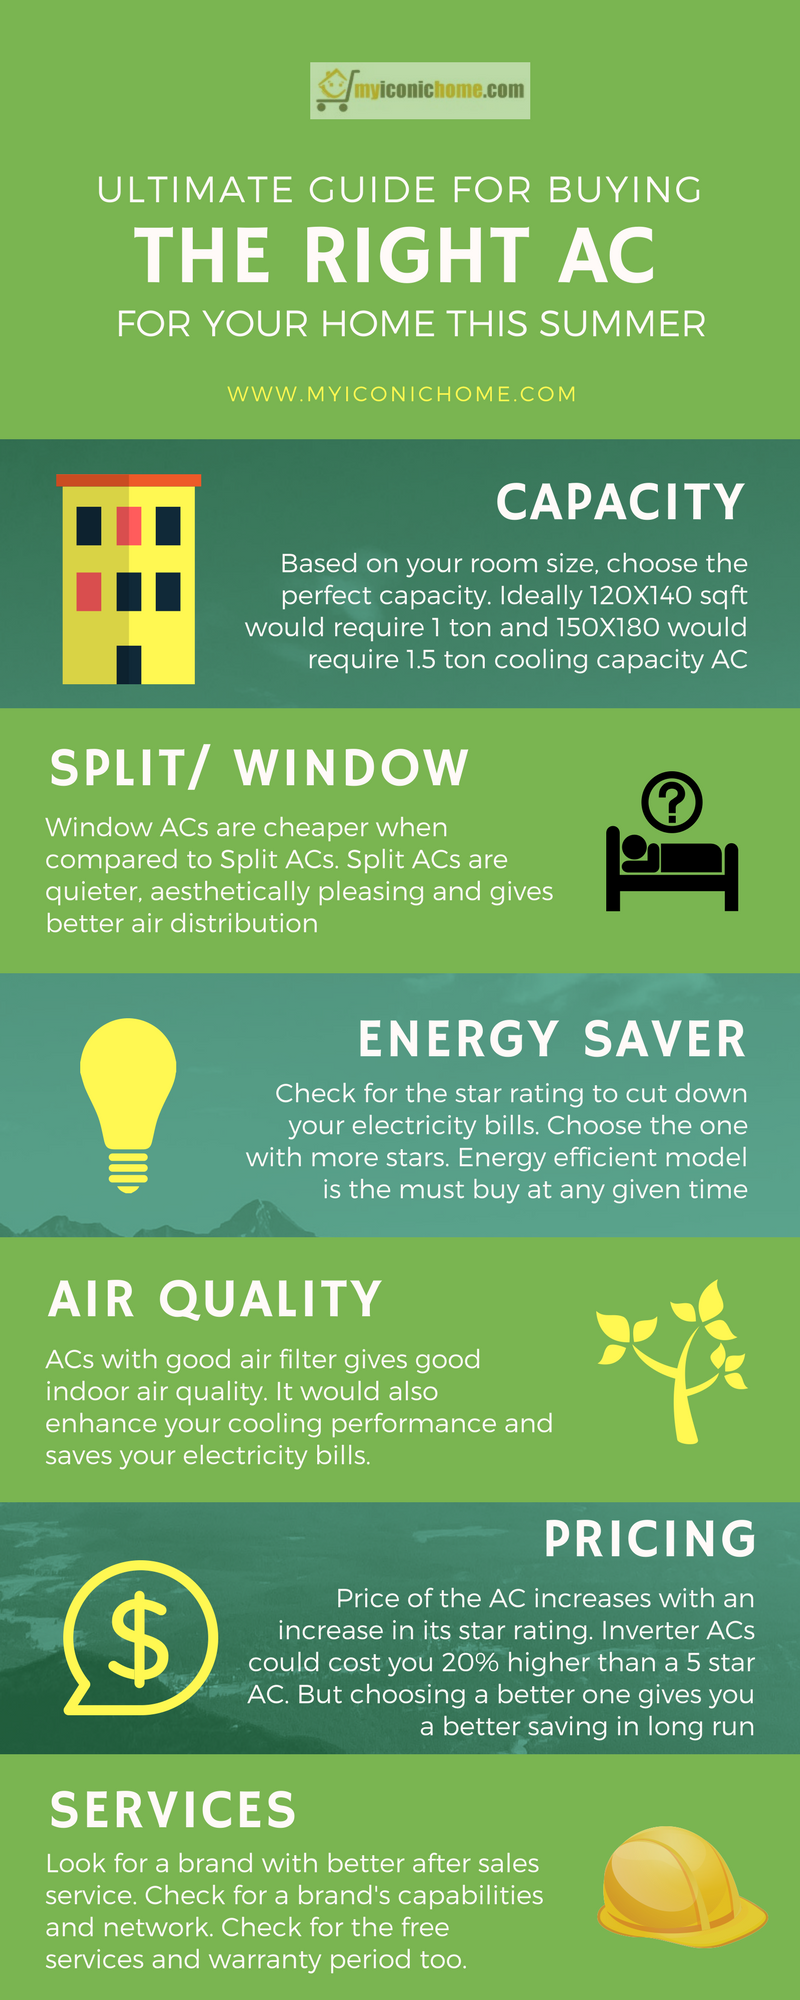 The Ultimate Guide for Buying the Right AC This Summer   Infographic Post